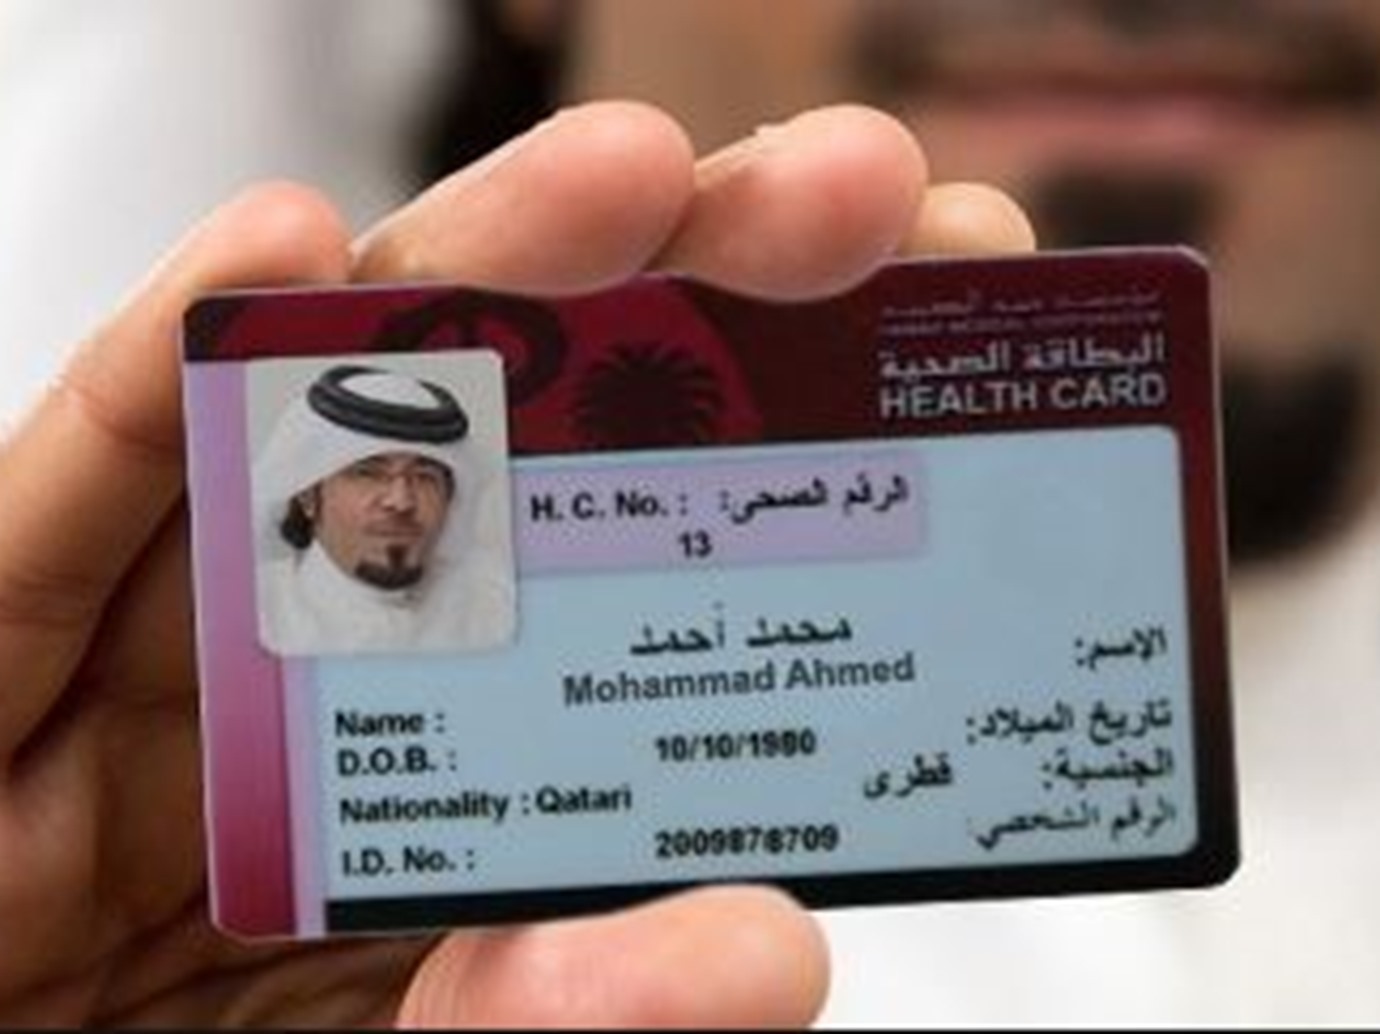 How to inquire about health card number in Qatar